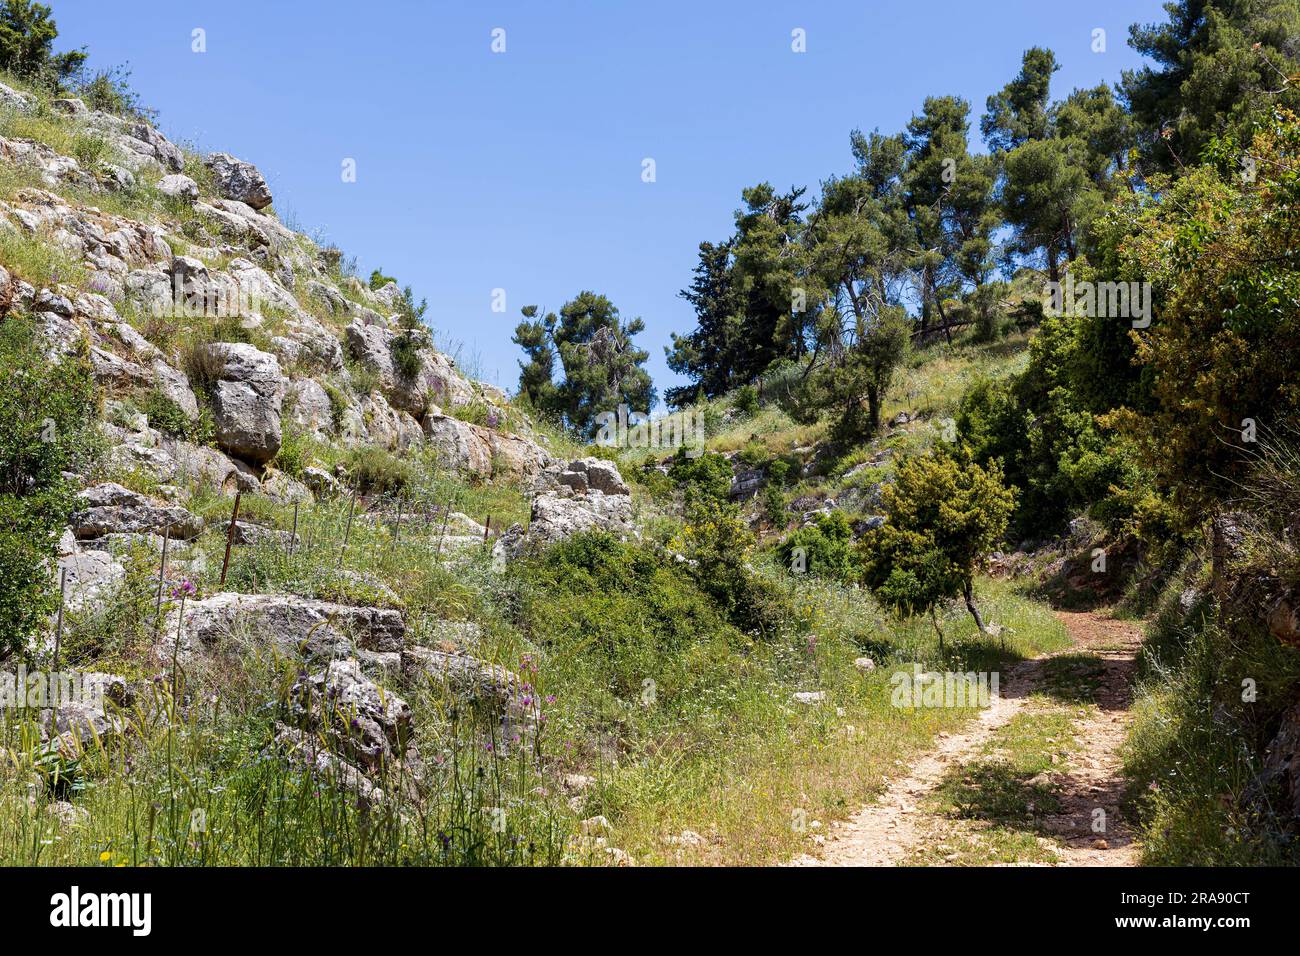 Mount Meron is a mountain in the Upper Galilee region of Israel. It has special significance in Jewish religious tradition and parts of it have been d Stock Photo